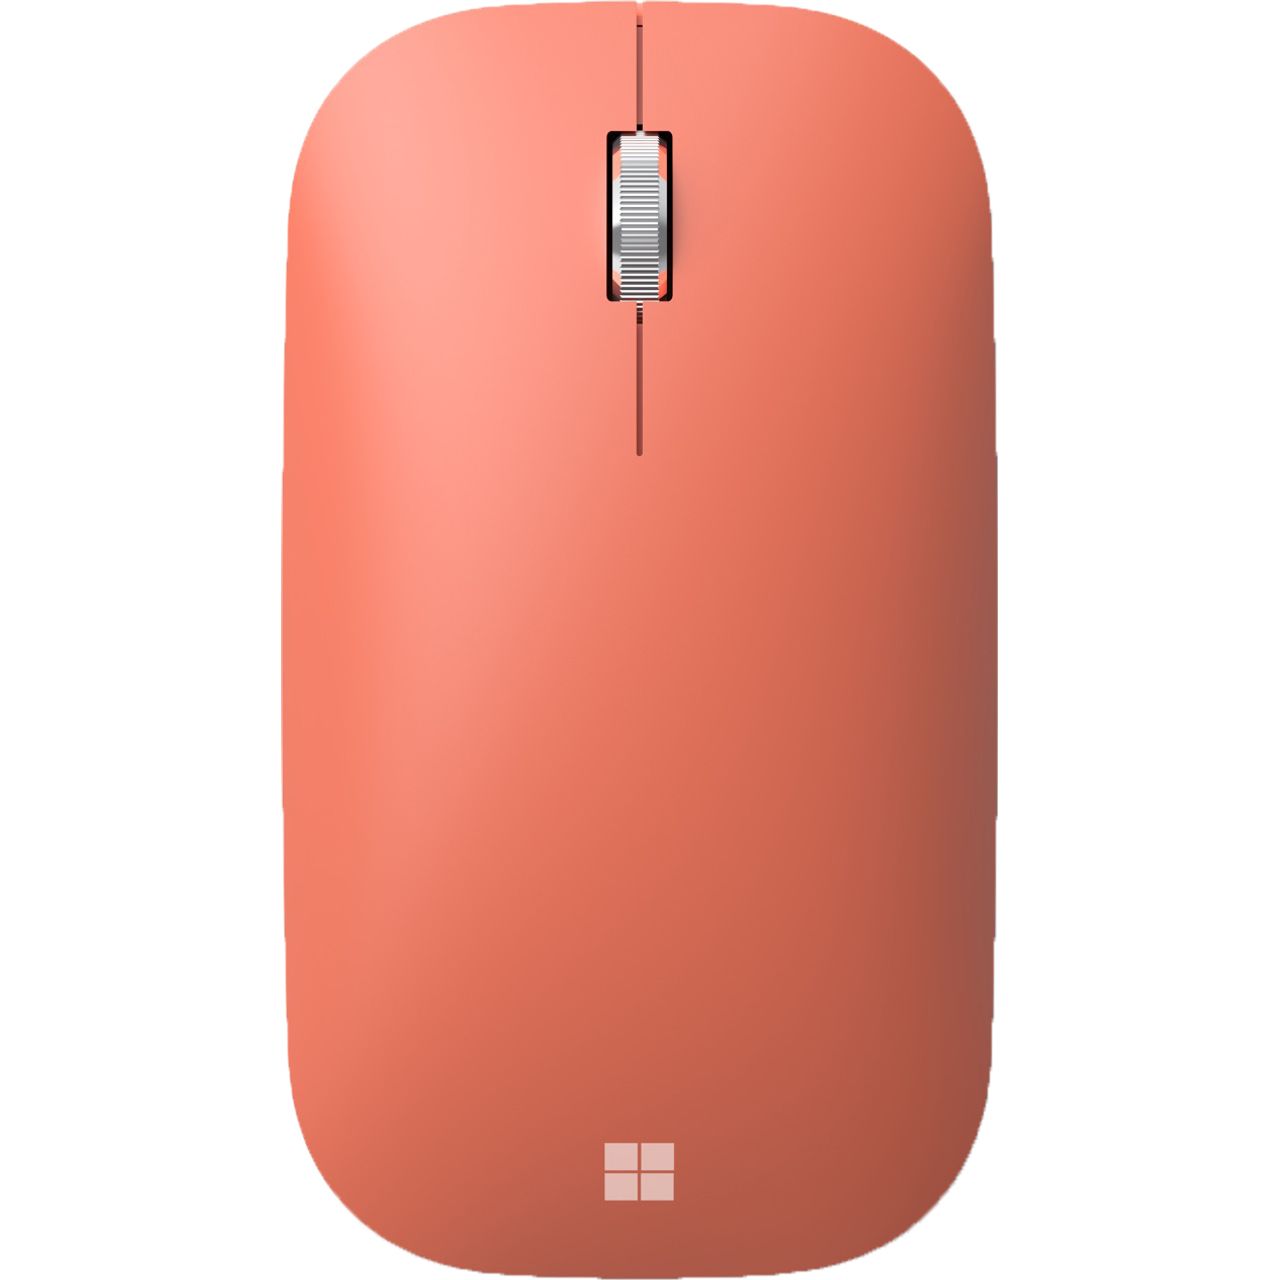 Microsoft Modern Mobile Mouse Review